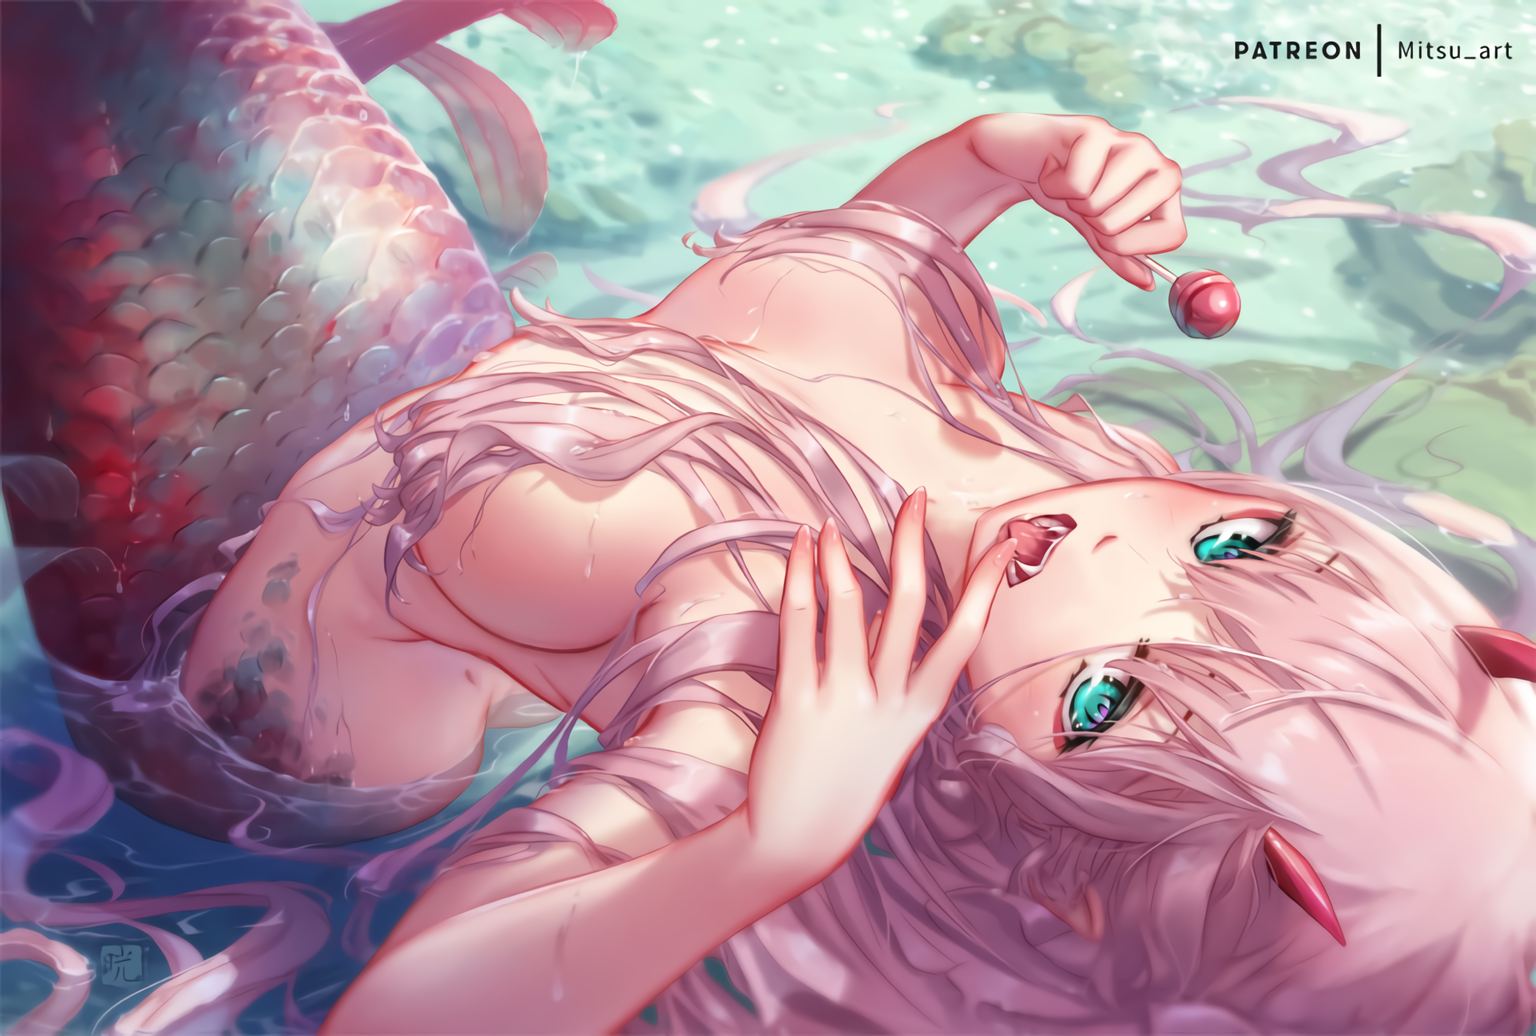 Anime 1536x1036 Darling in the FranXX Zero Two (Darling in the FranXX) ass pink hair aqua eyes horns long hair wet hair water wet fangs open mouth candy anime mermaids boobs hair covering boobs nude anime girls Mitsu patreon text watermarked